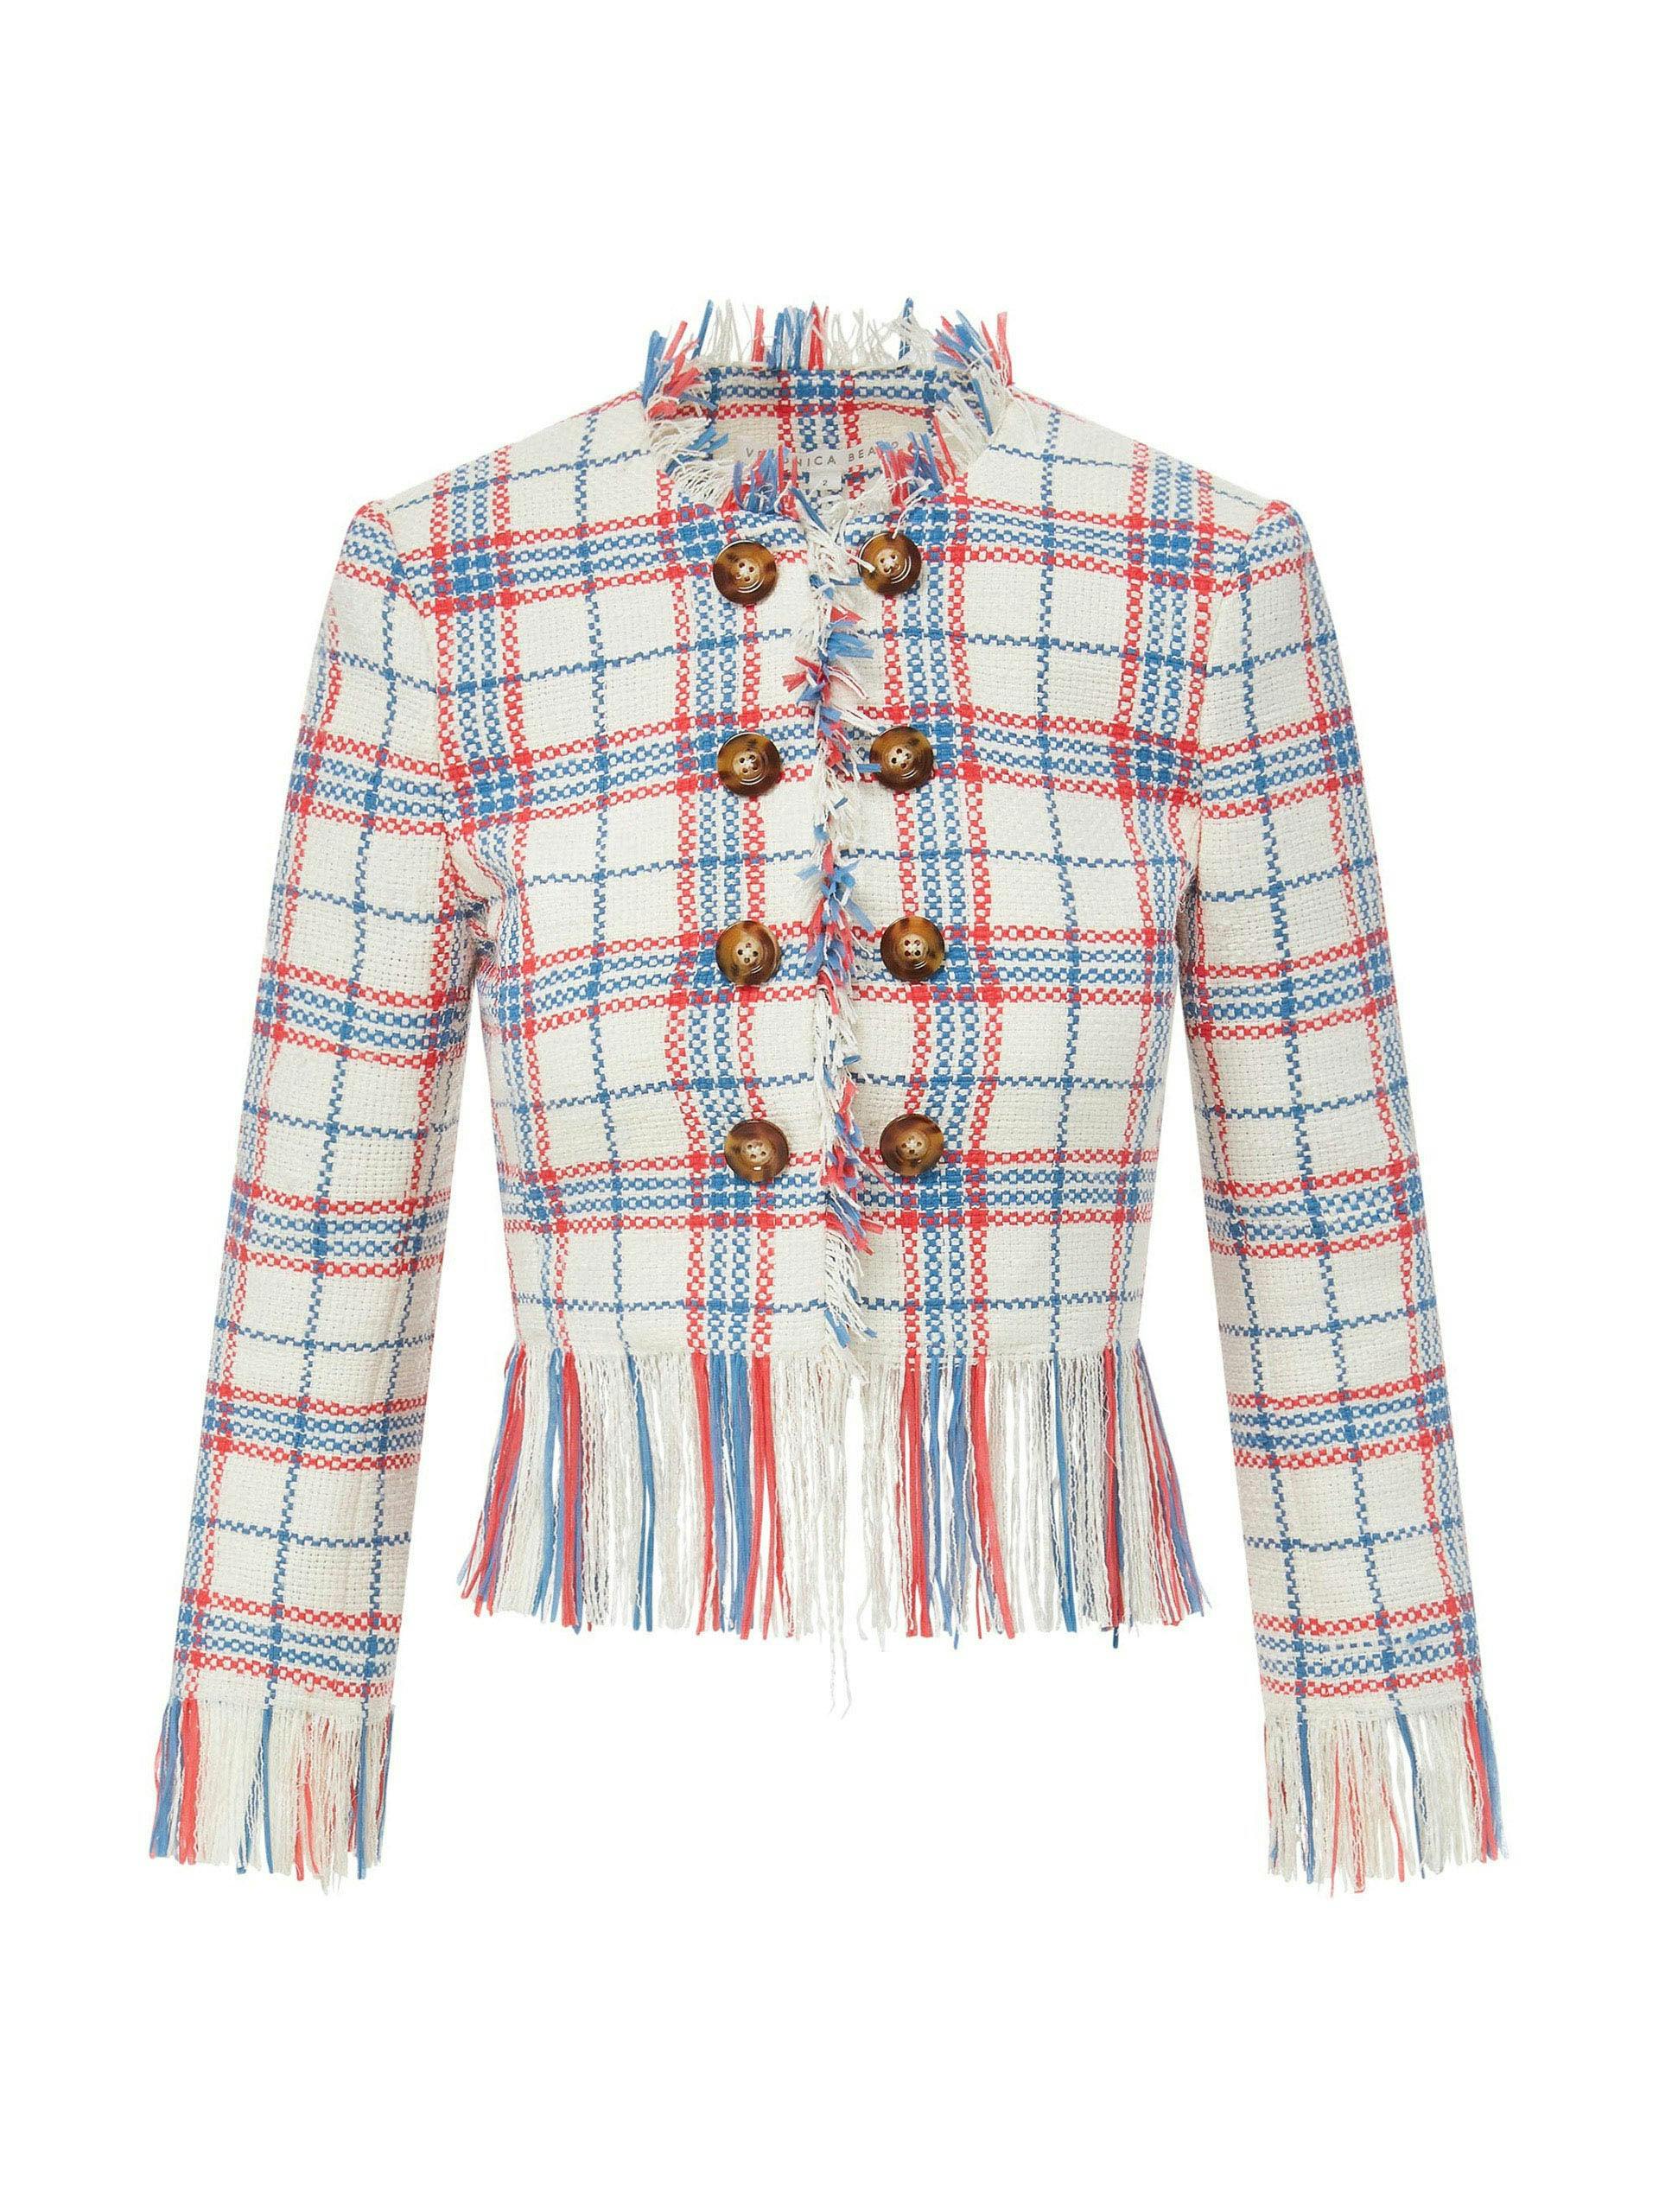 White, red and blue checkered fringed blazer